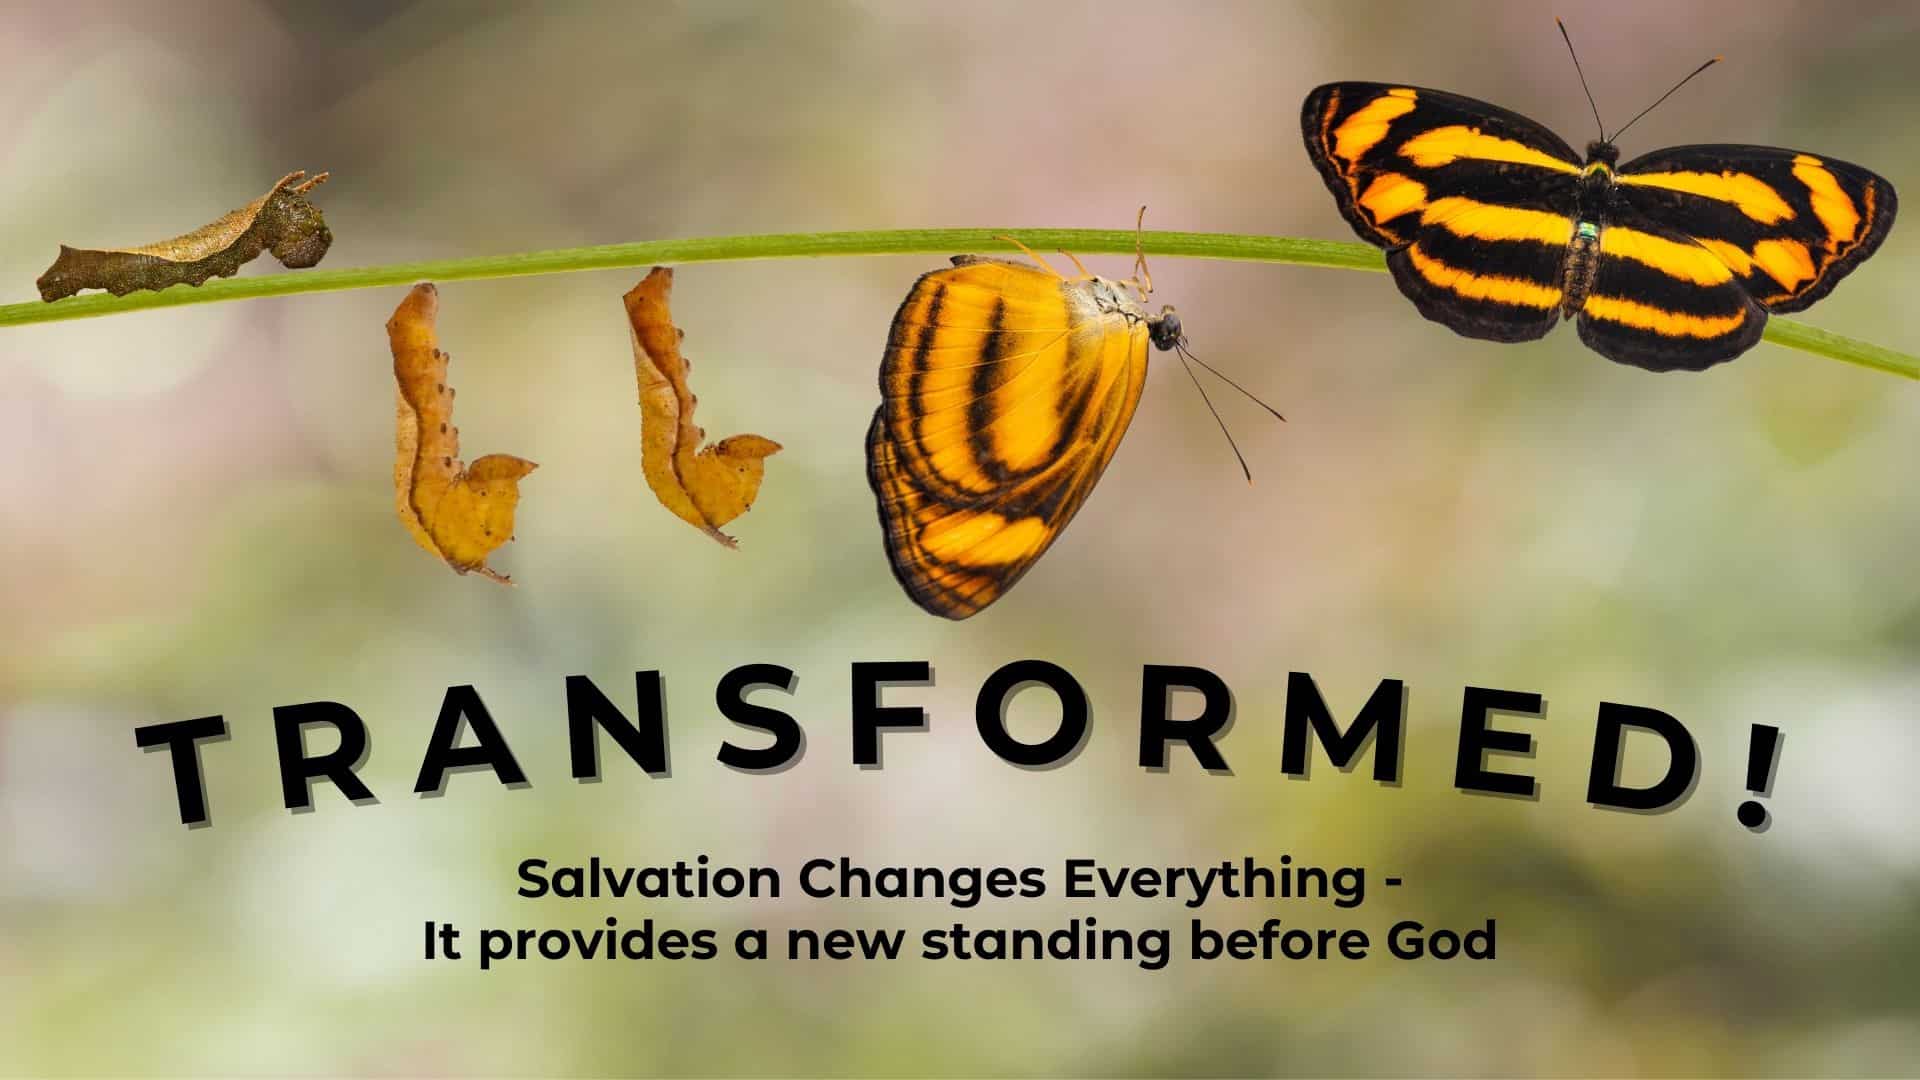 Transformed! Salvation provides a new standing before God